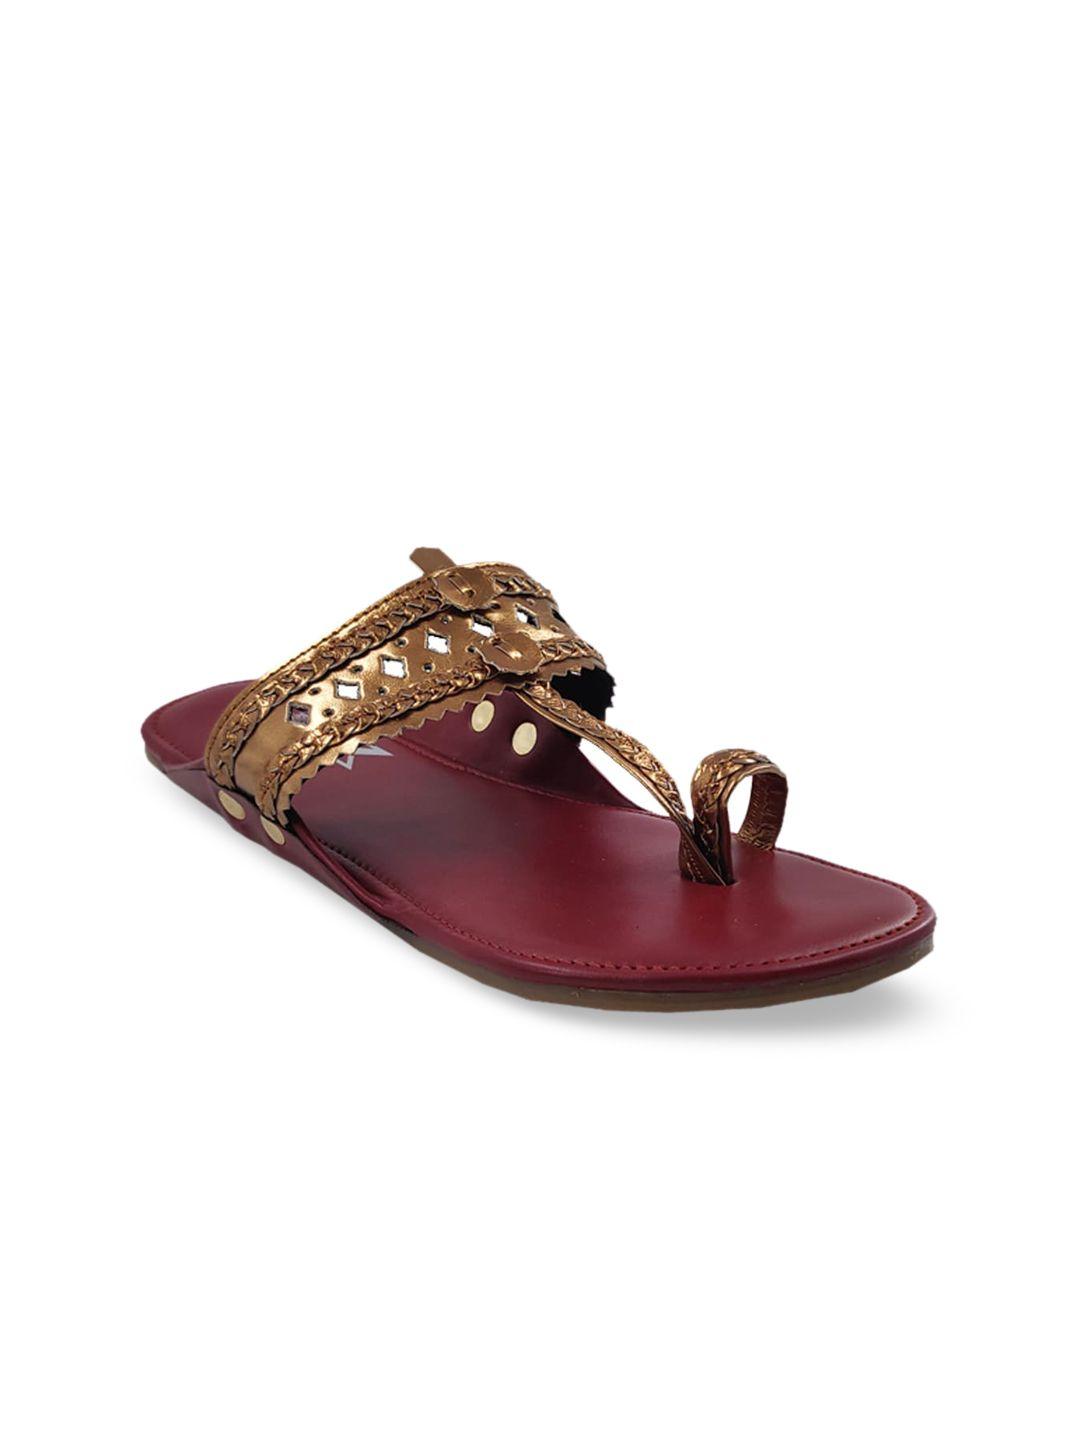 the-madras-trunk-women-brown-textured-leather-one-toe-flats